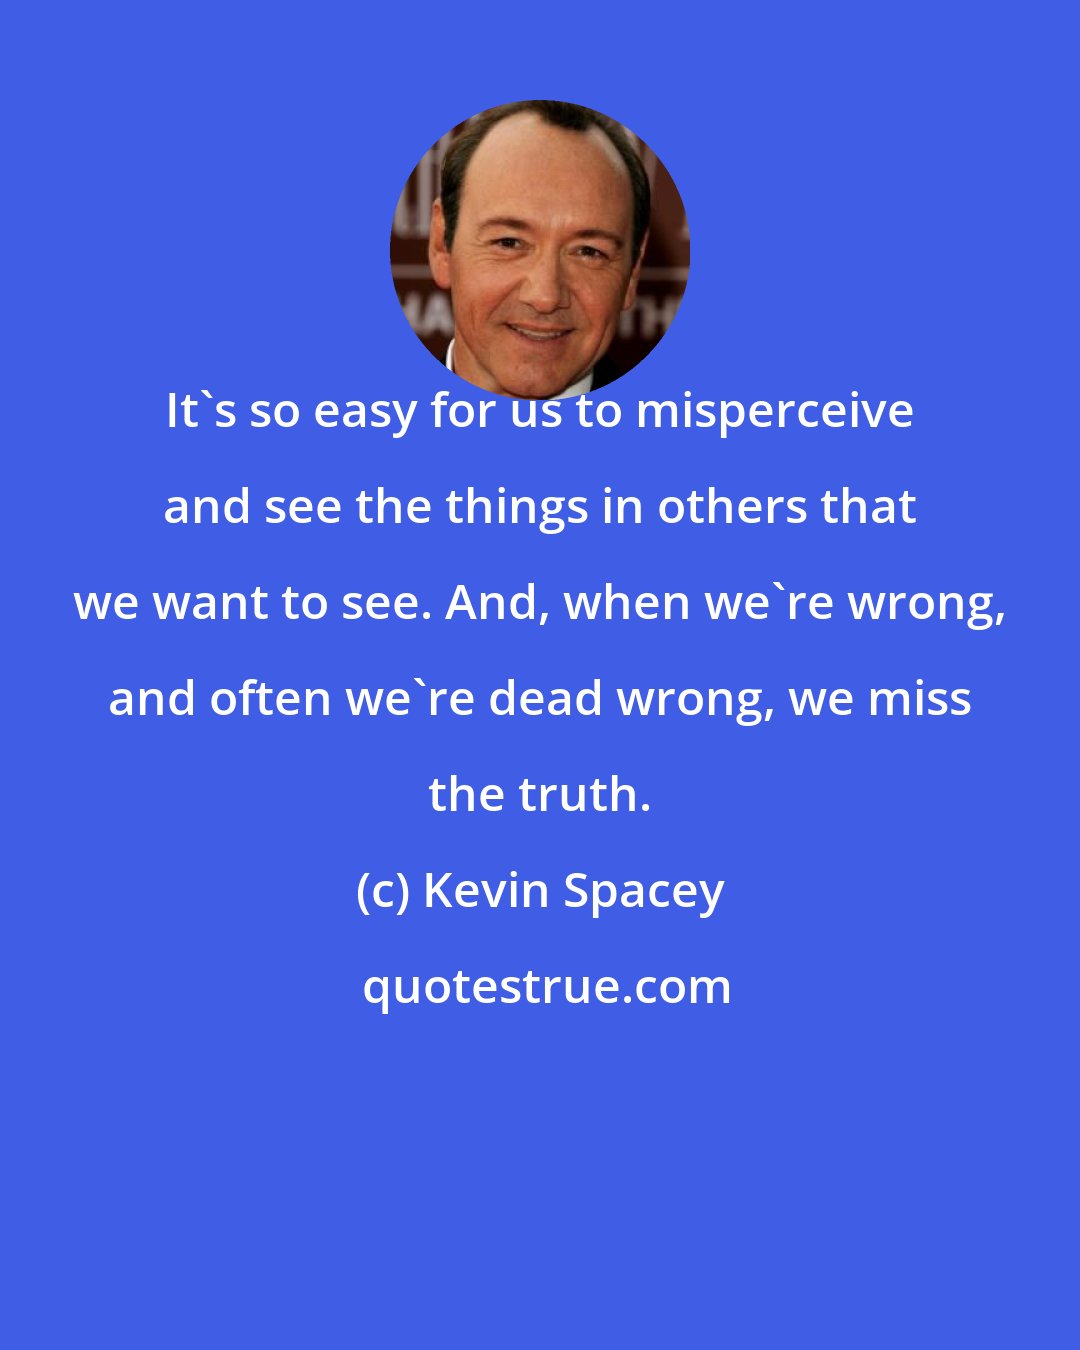 Kevin Spacey: It's so easy for us to misperceive and see the things in others that we want to see. And, when we're wrong, and often we're dead wrong, we miss the truth.